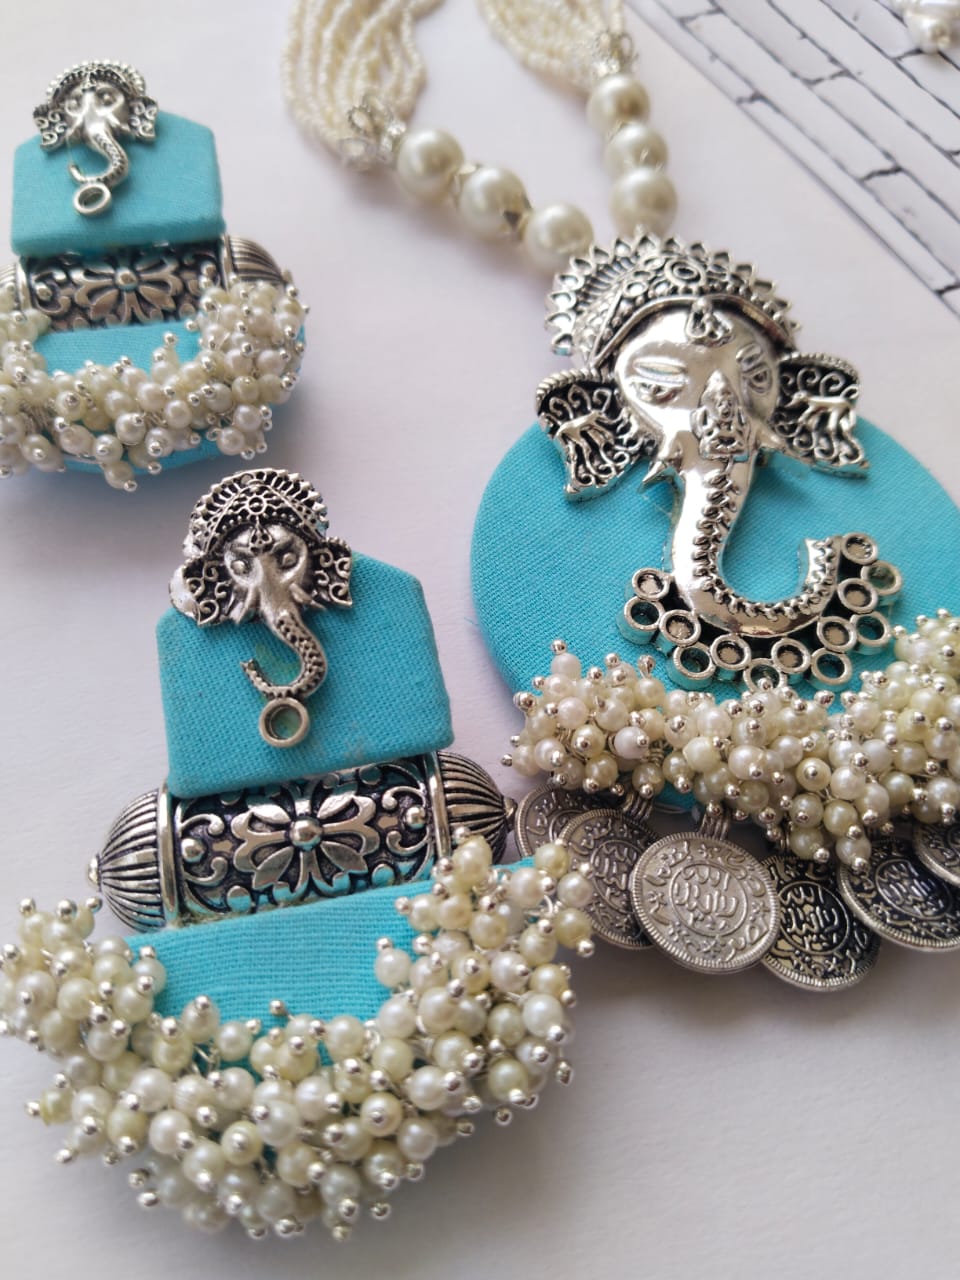 Light blue necklace with ganpati charm and silver beads with matching earrings